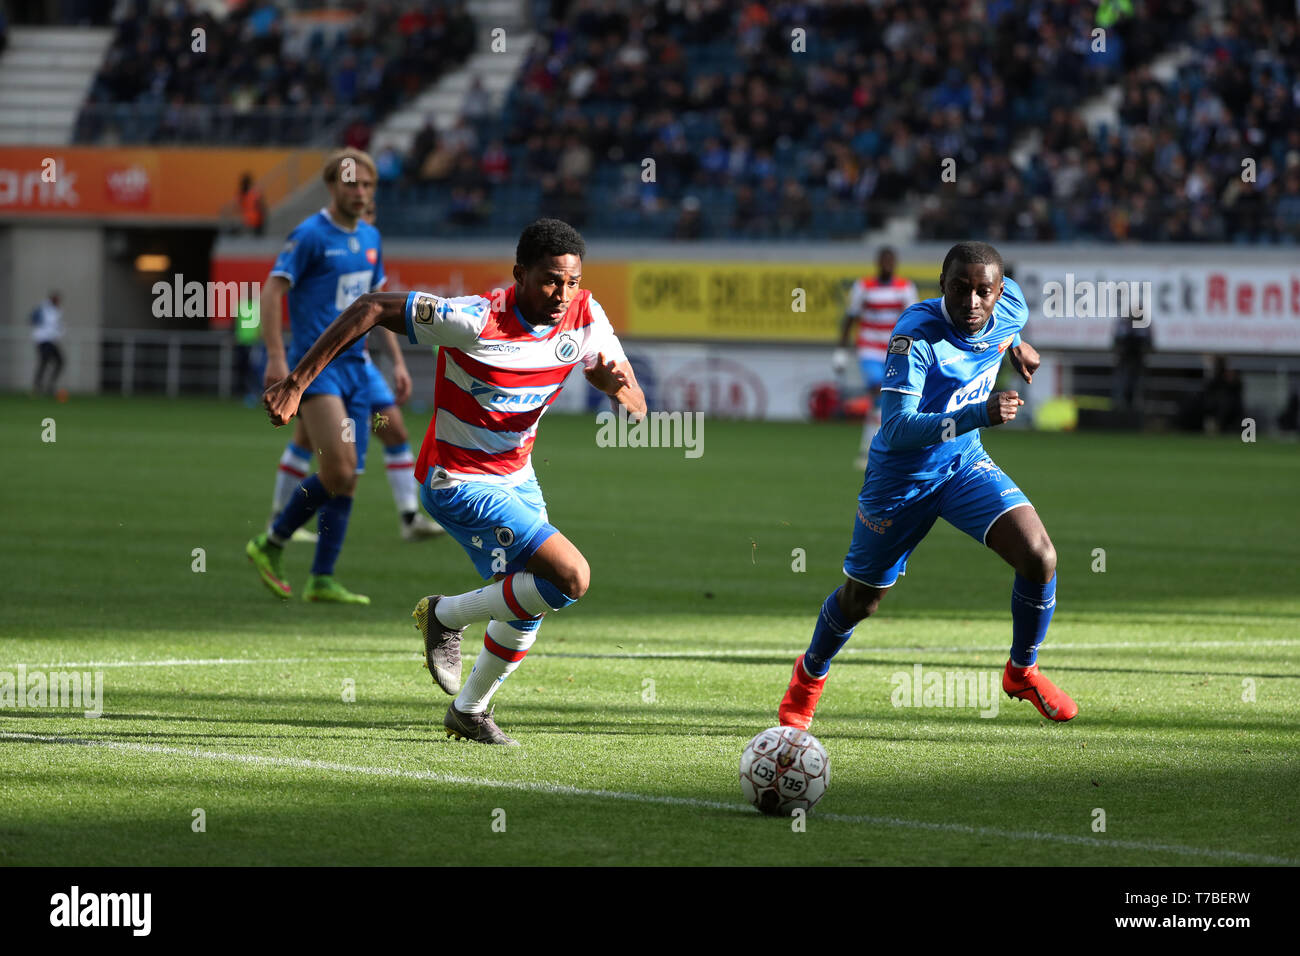 Gent, Belgium. 05th May, 2019. GHENT, BELGIUM - MAY 05: Emmanuel Bonaventure Dennis of Club Brugge and Nana Asare of Kaa Gent fight for the ball during the Jupiler Pro League play-off 1 match (day 7) between Kaa Gent and Club Brugge on May 05, 2019 in Gent, Belgium. (Photo by Vincent V Credit: Pro Shots/Alamy Live News Stock Photo